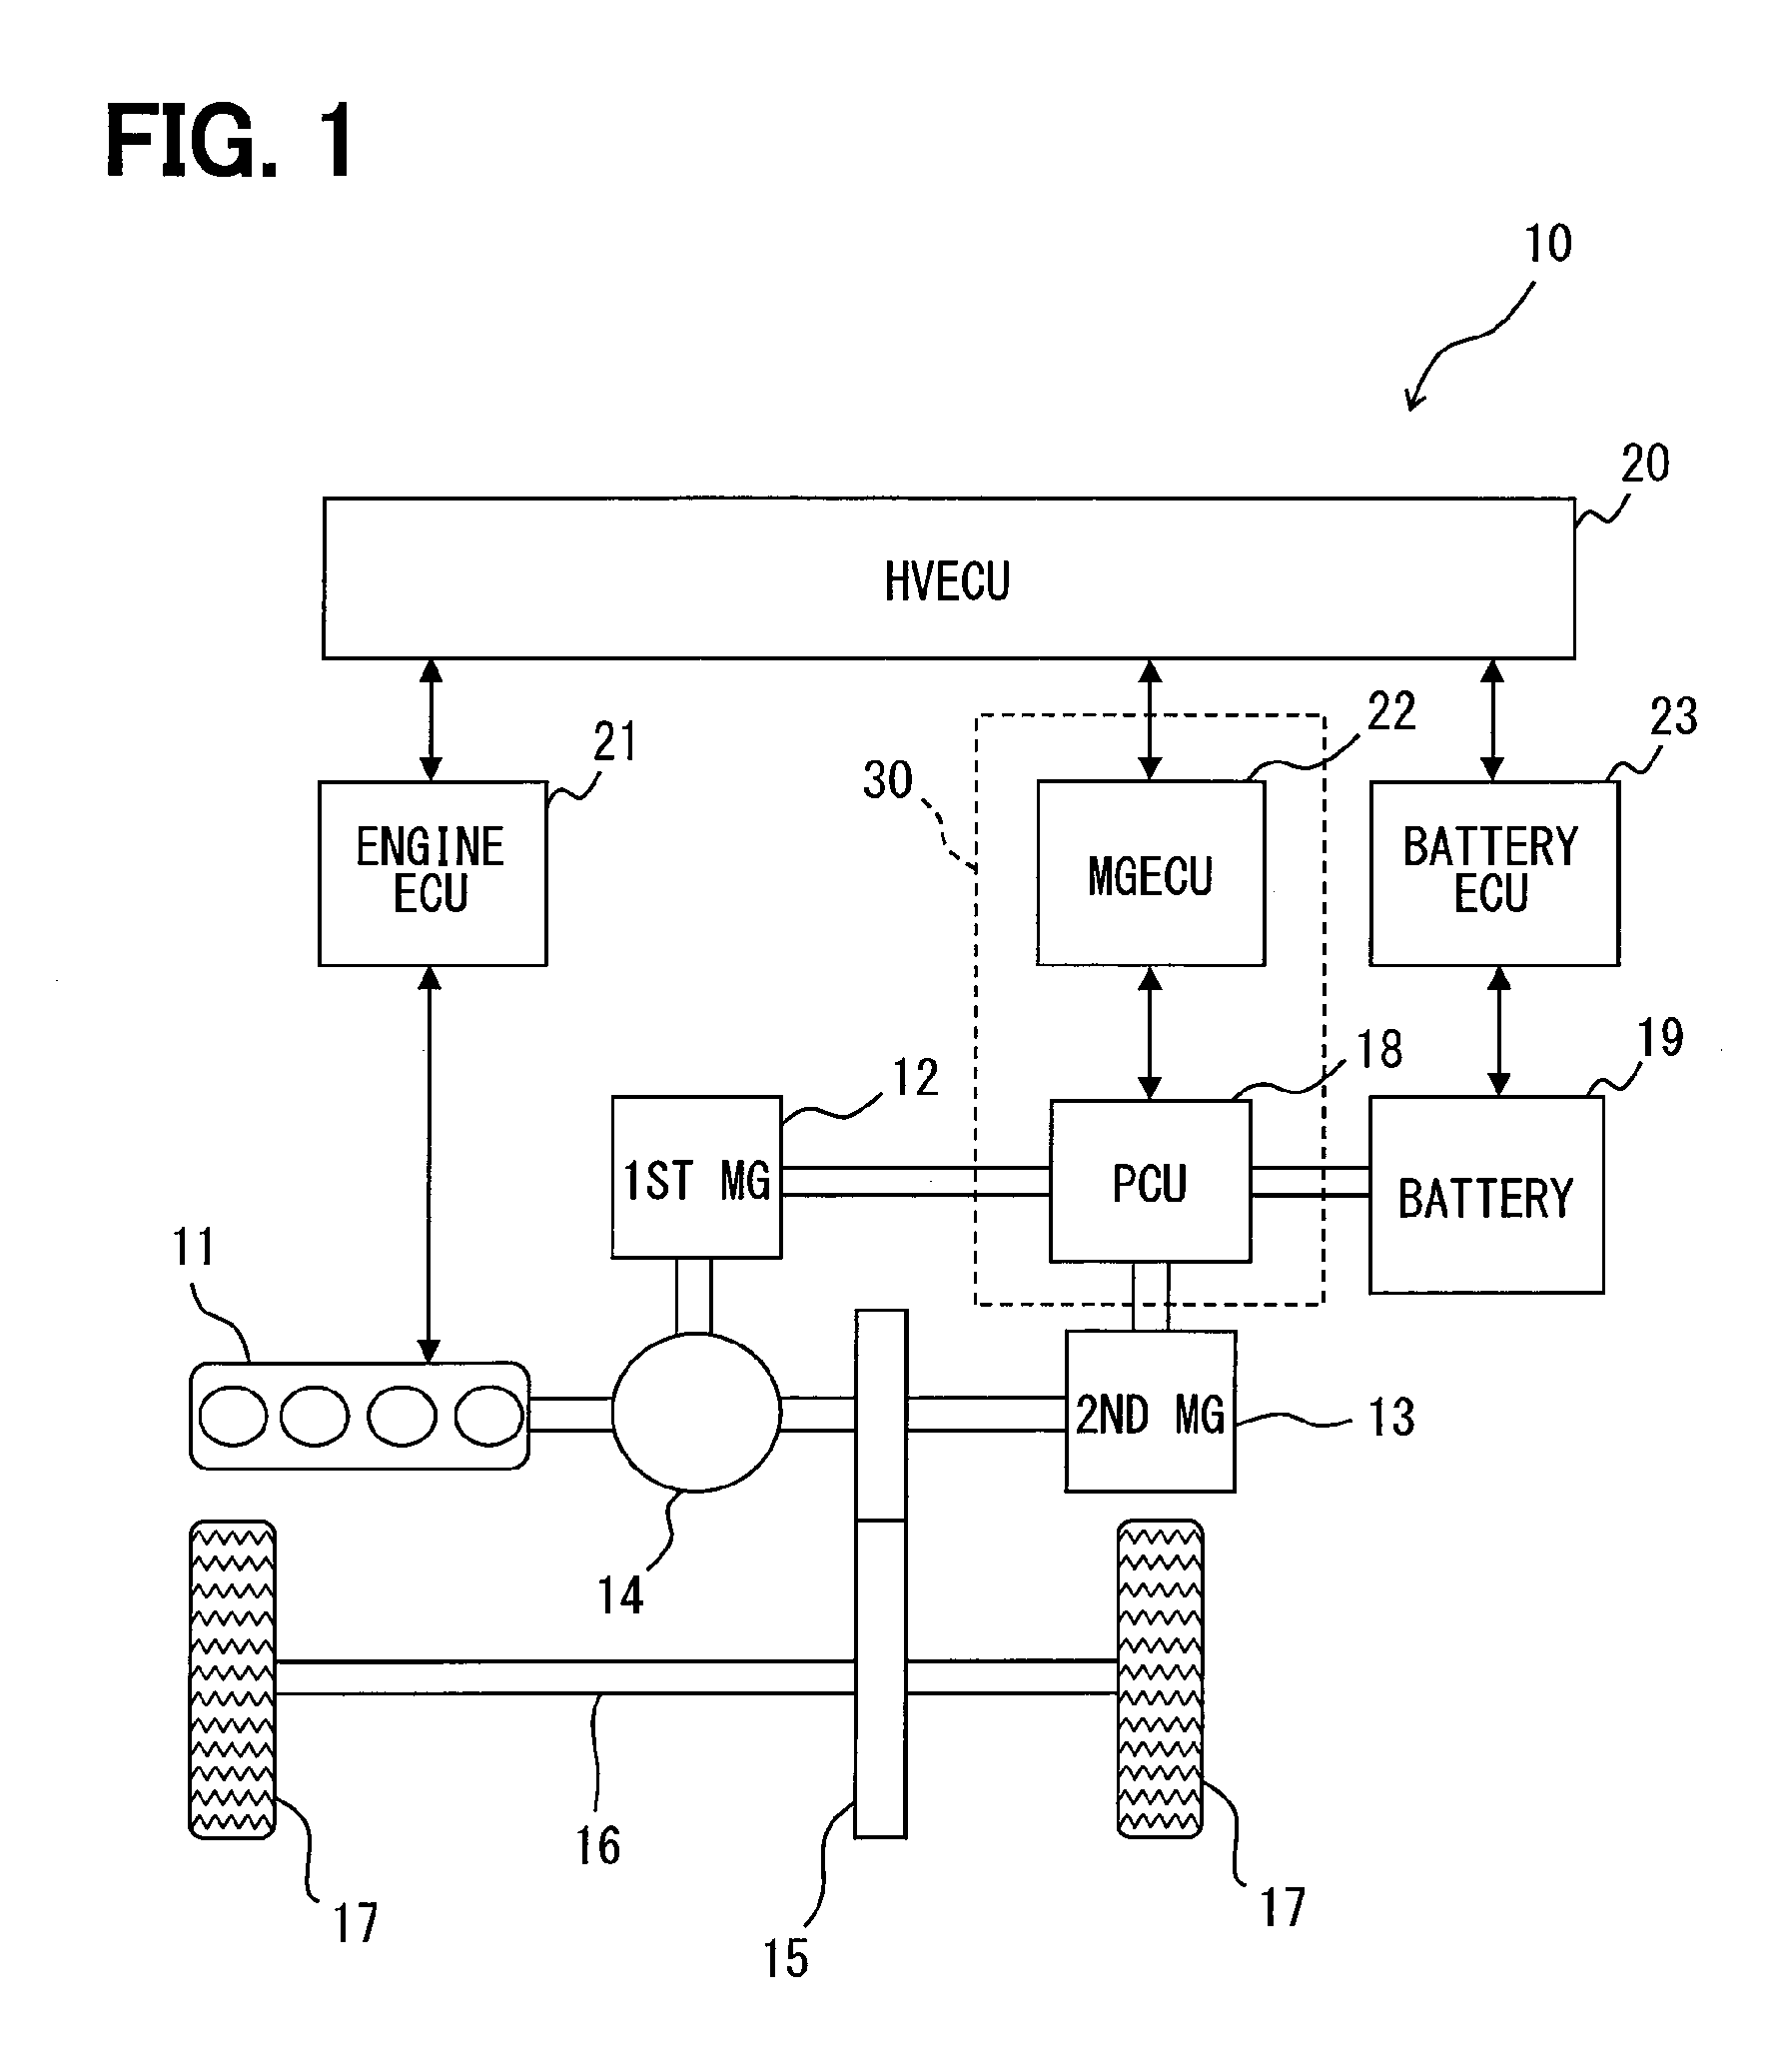 Rotating electric machine control system